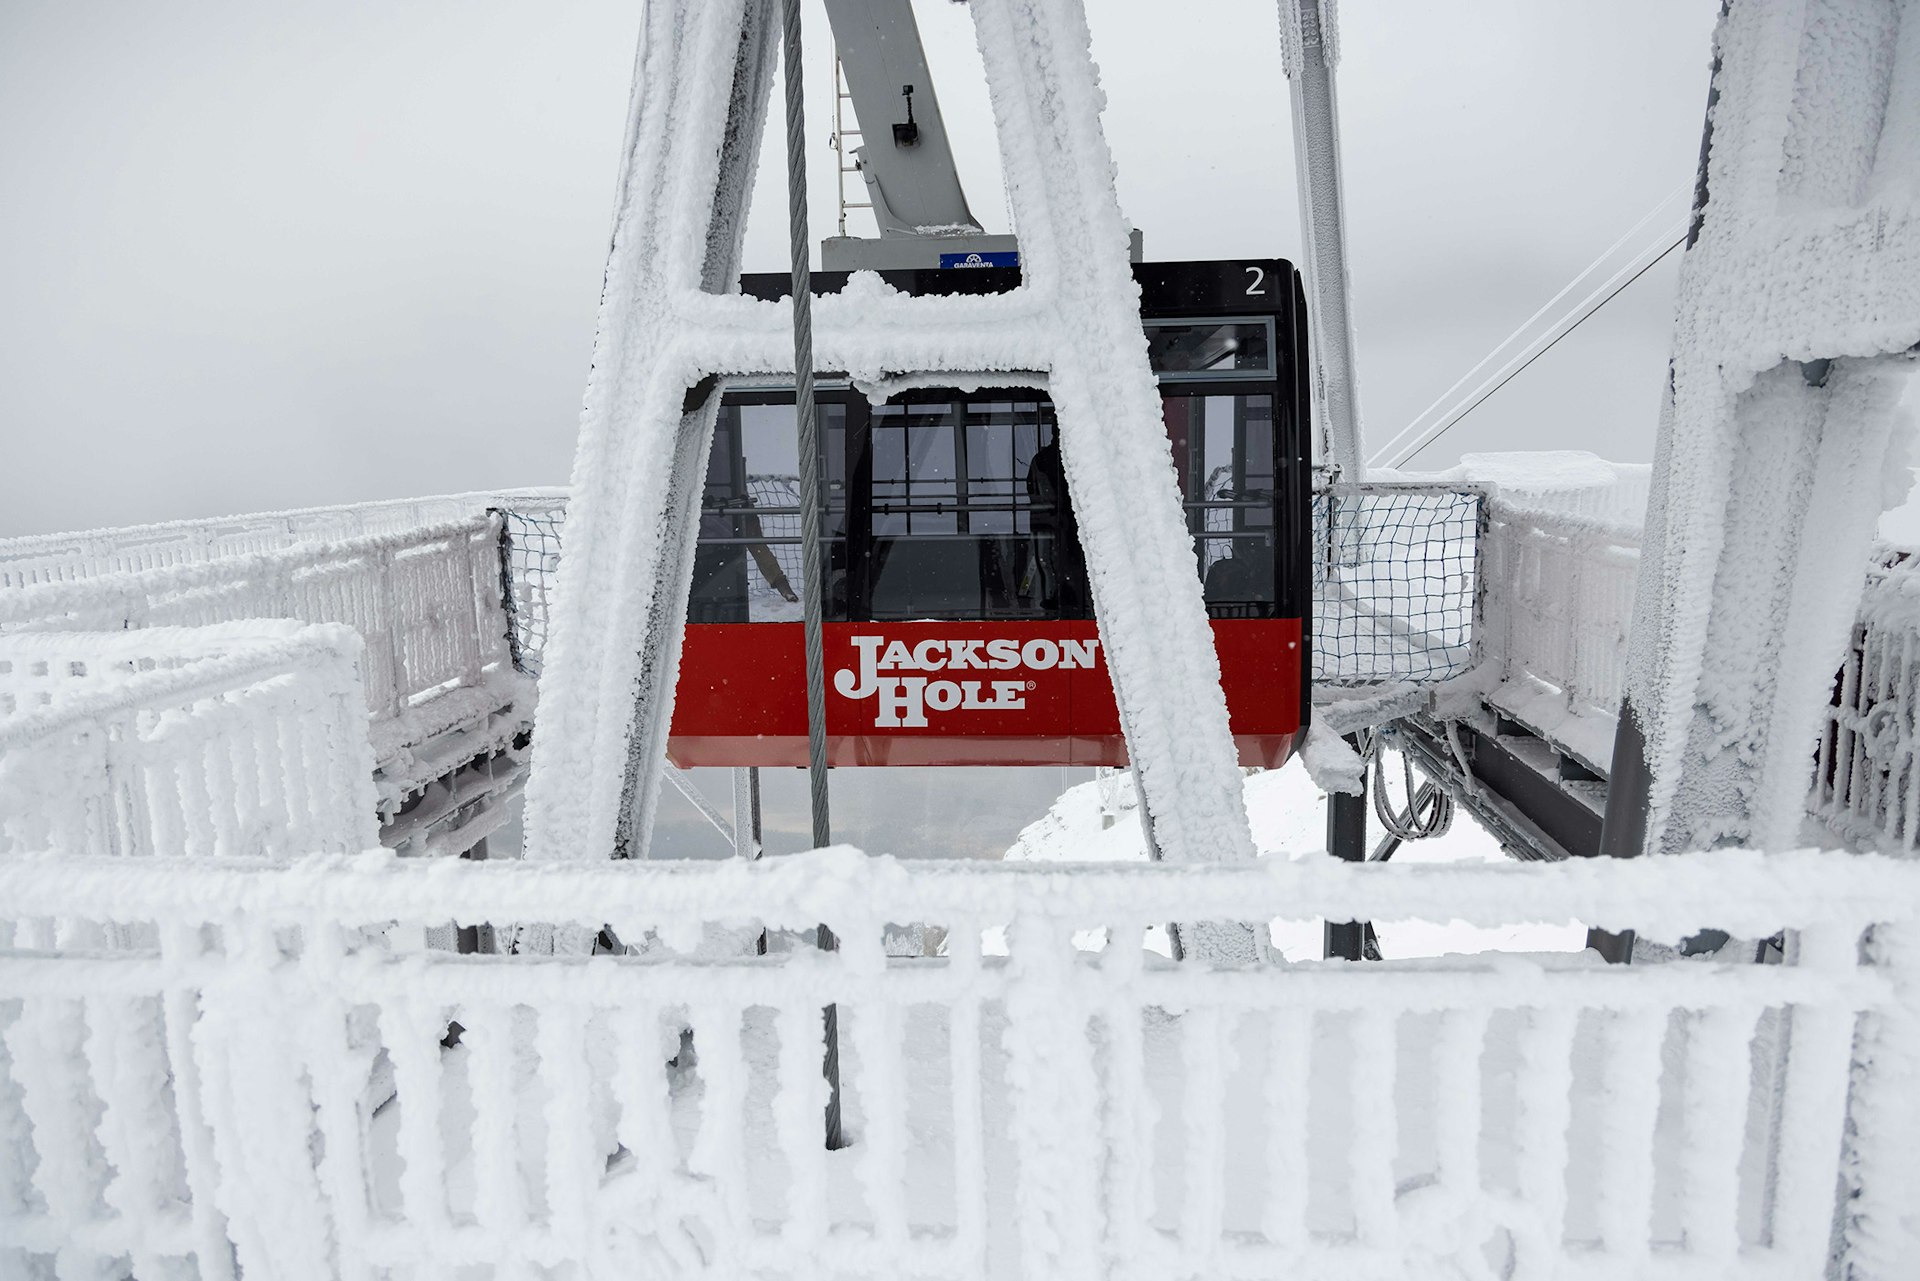 Snow covered Tram coming into the dock at the top